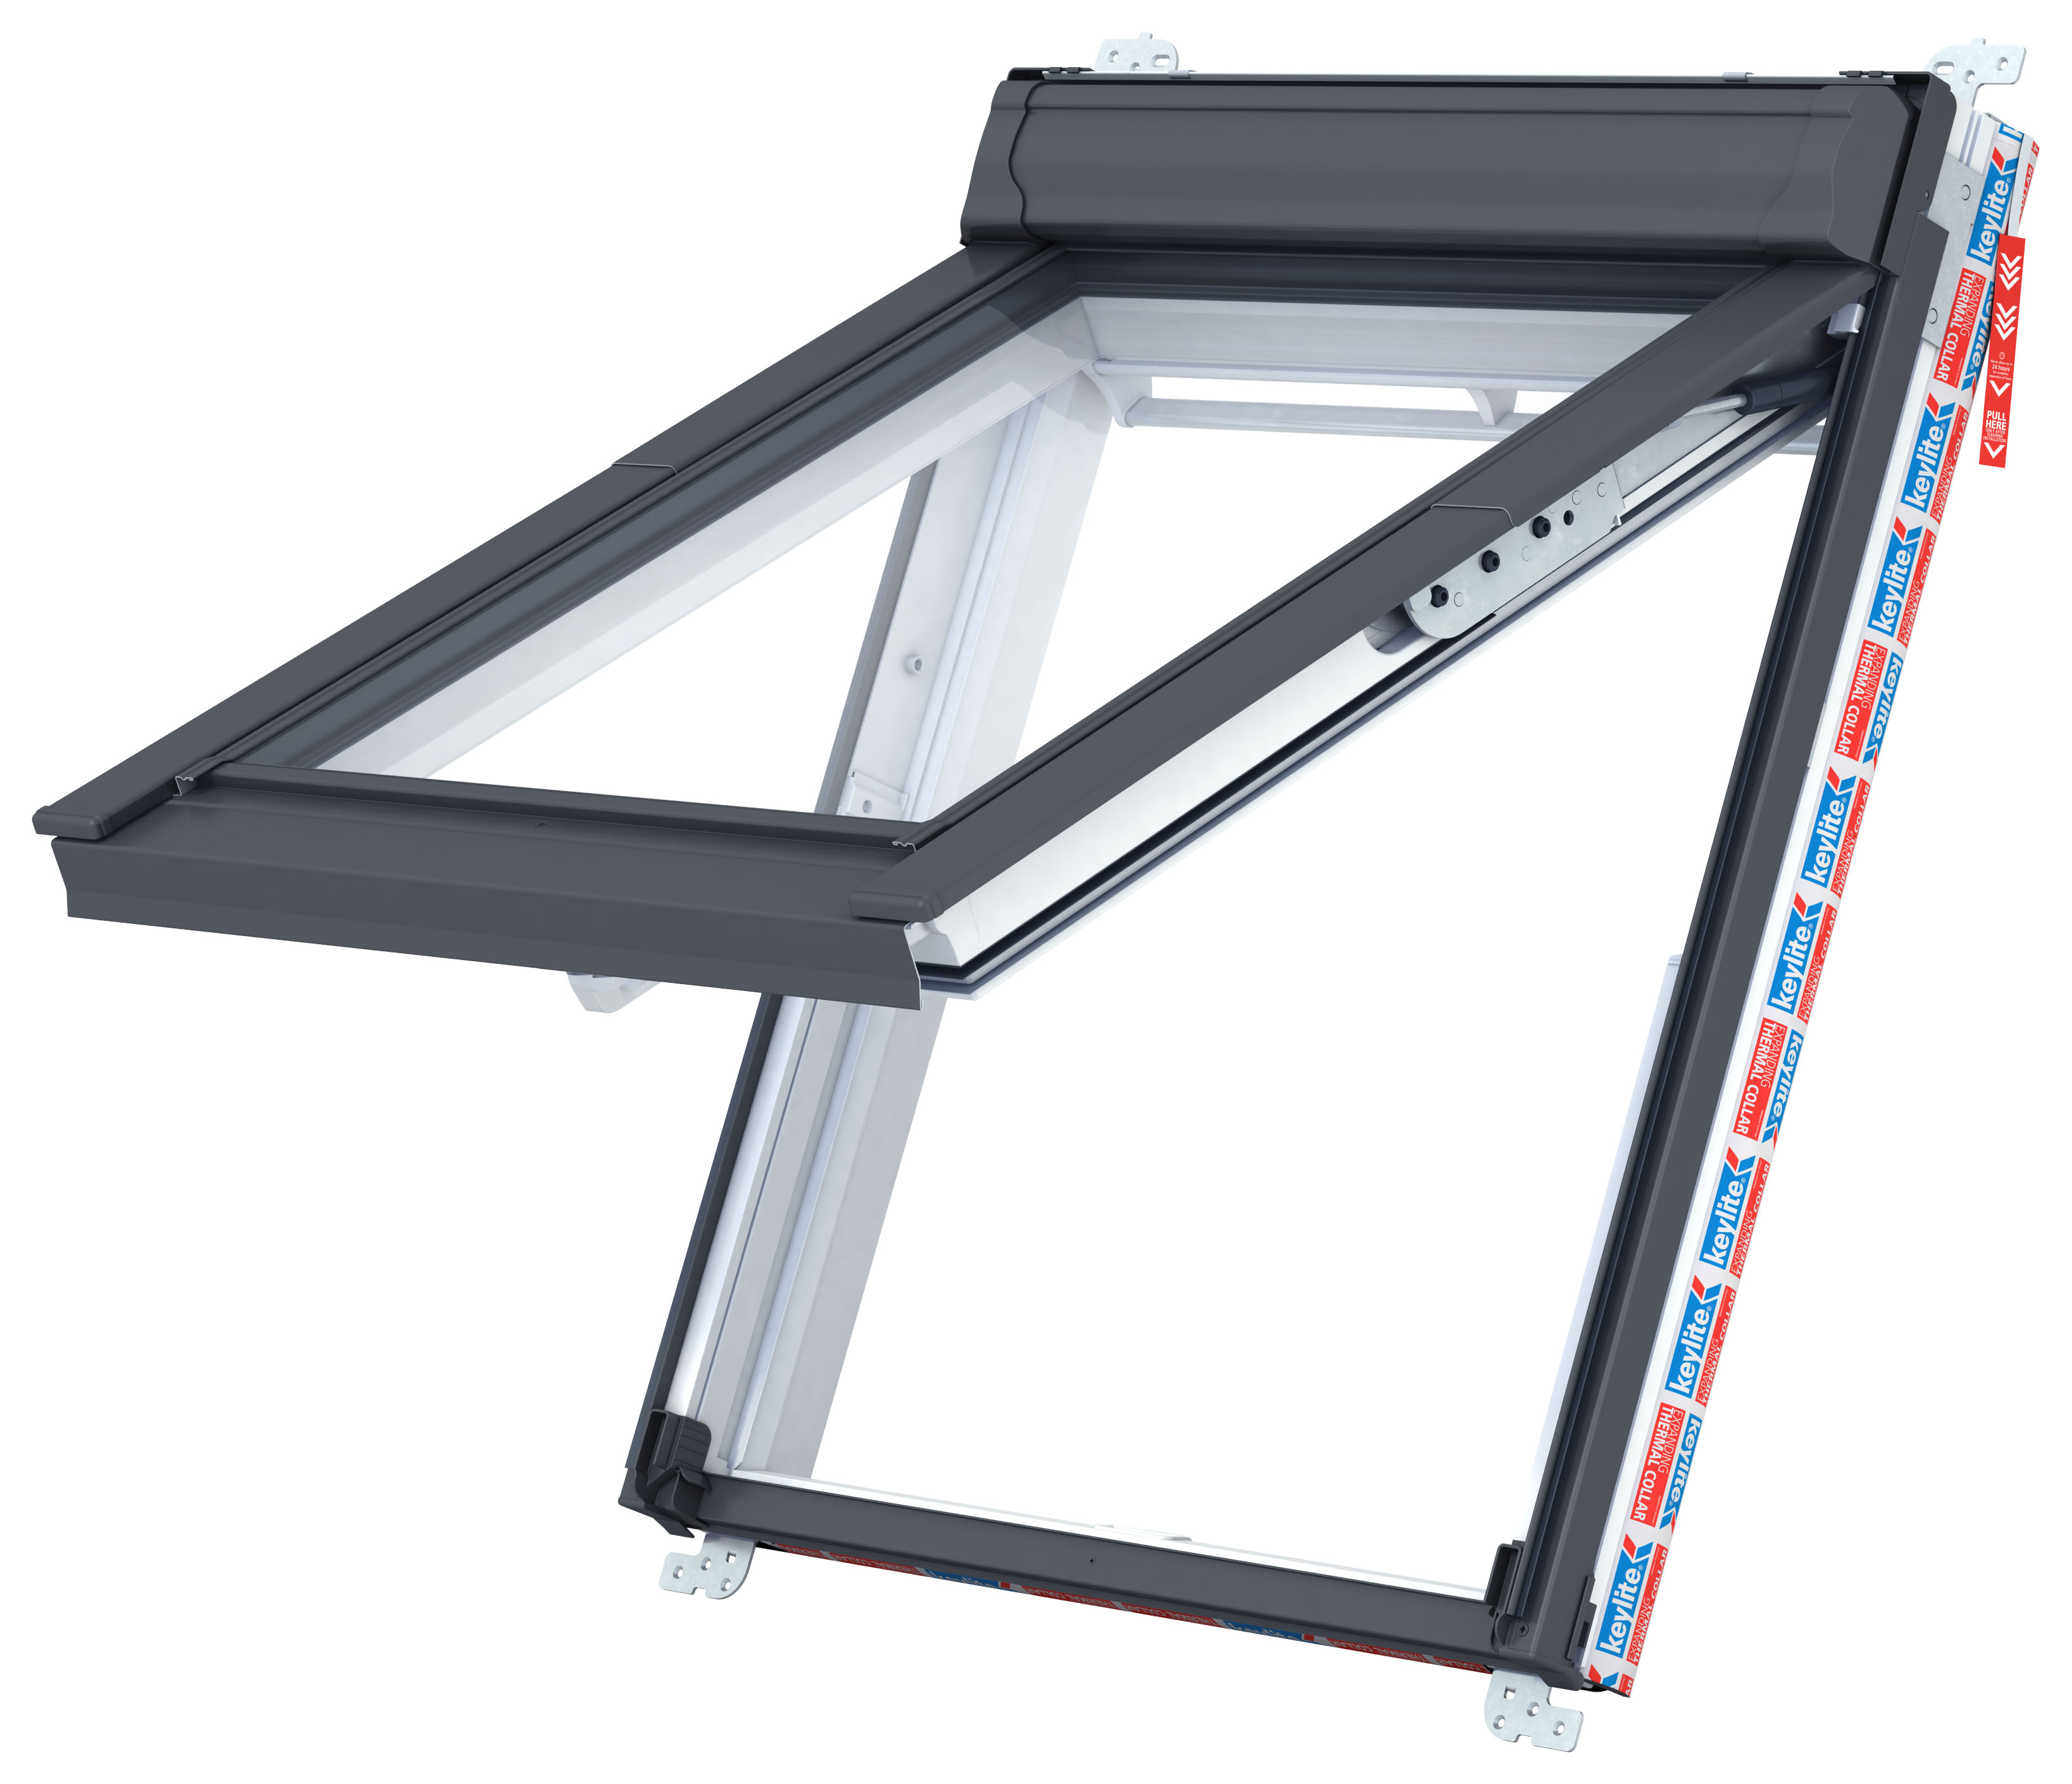 Image of Keylite PFE 04 HT PVC Fire Escape Hi-Therm Roof Window - 780 x 980mm